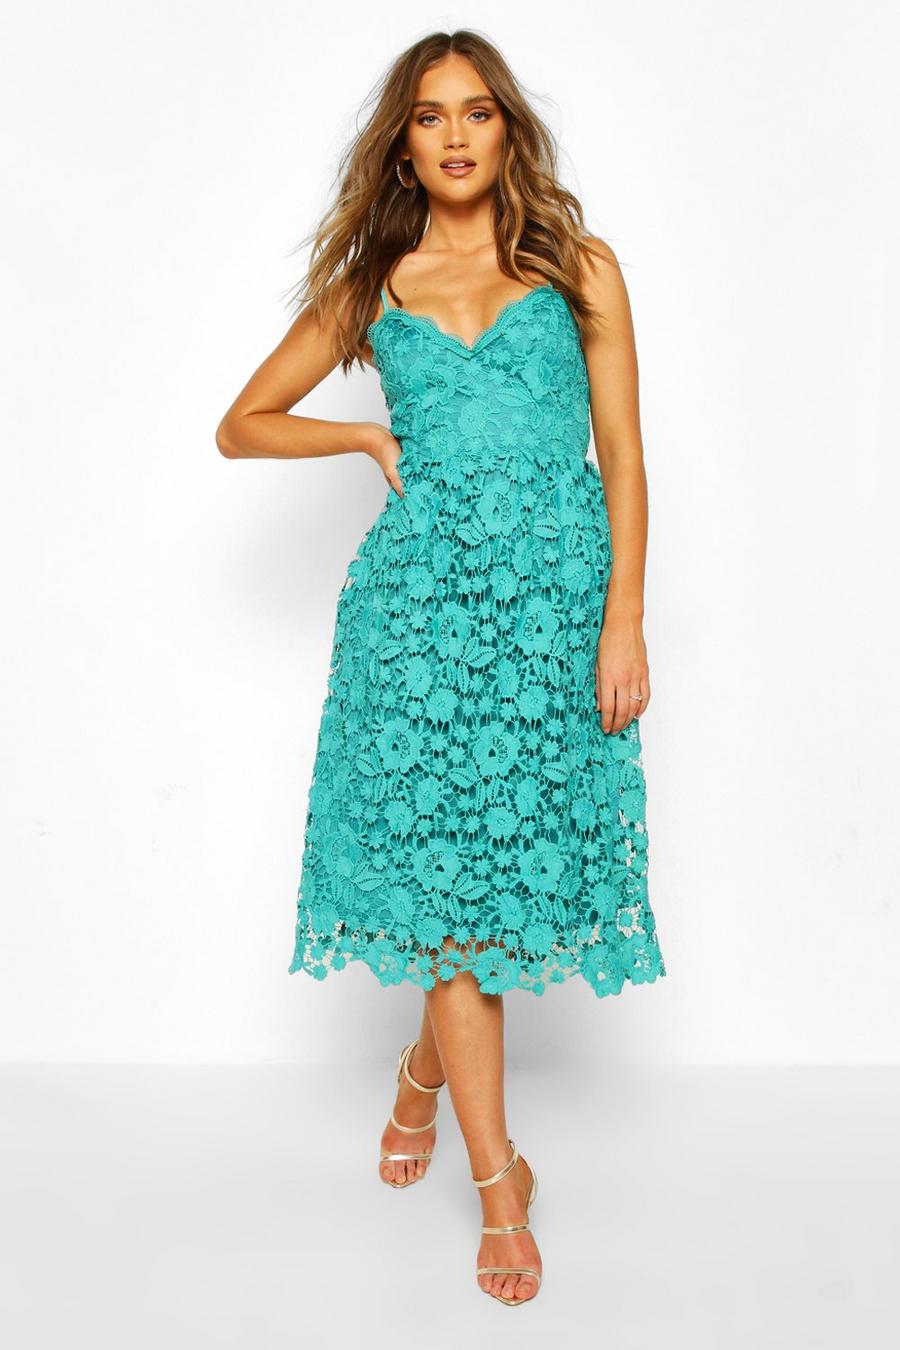 Teal Strappy Crochet Lace Skater Midi mesh Dress image number 1